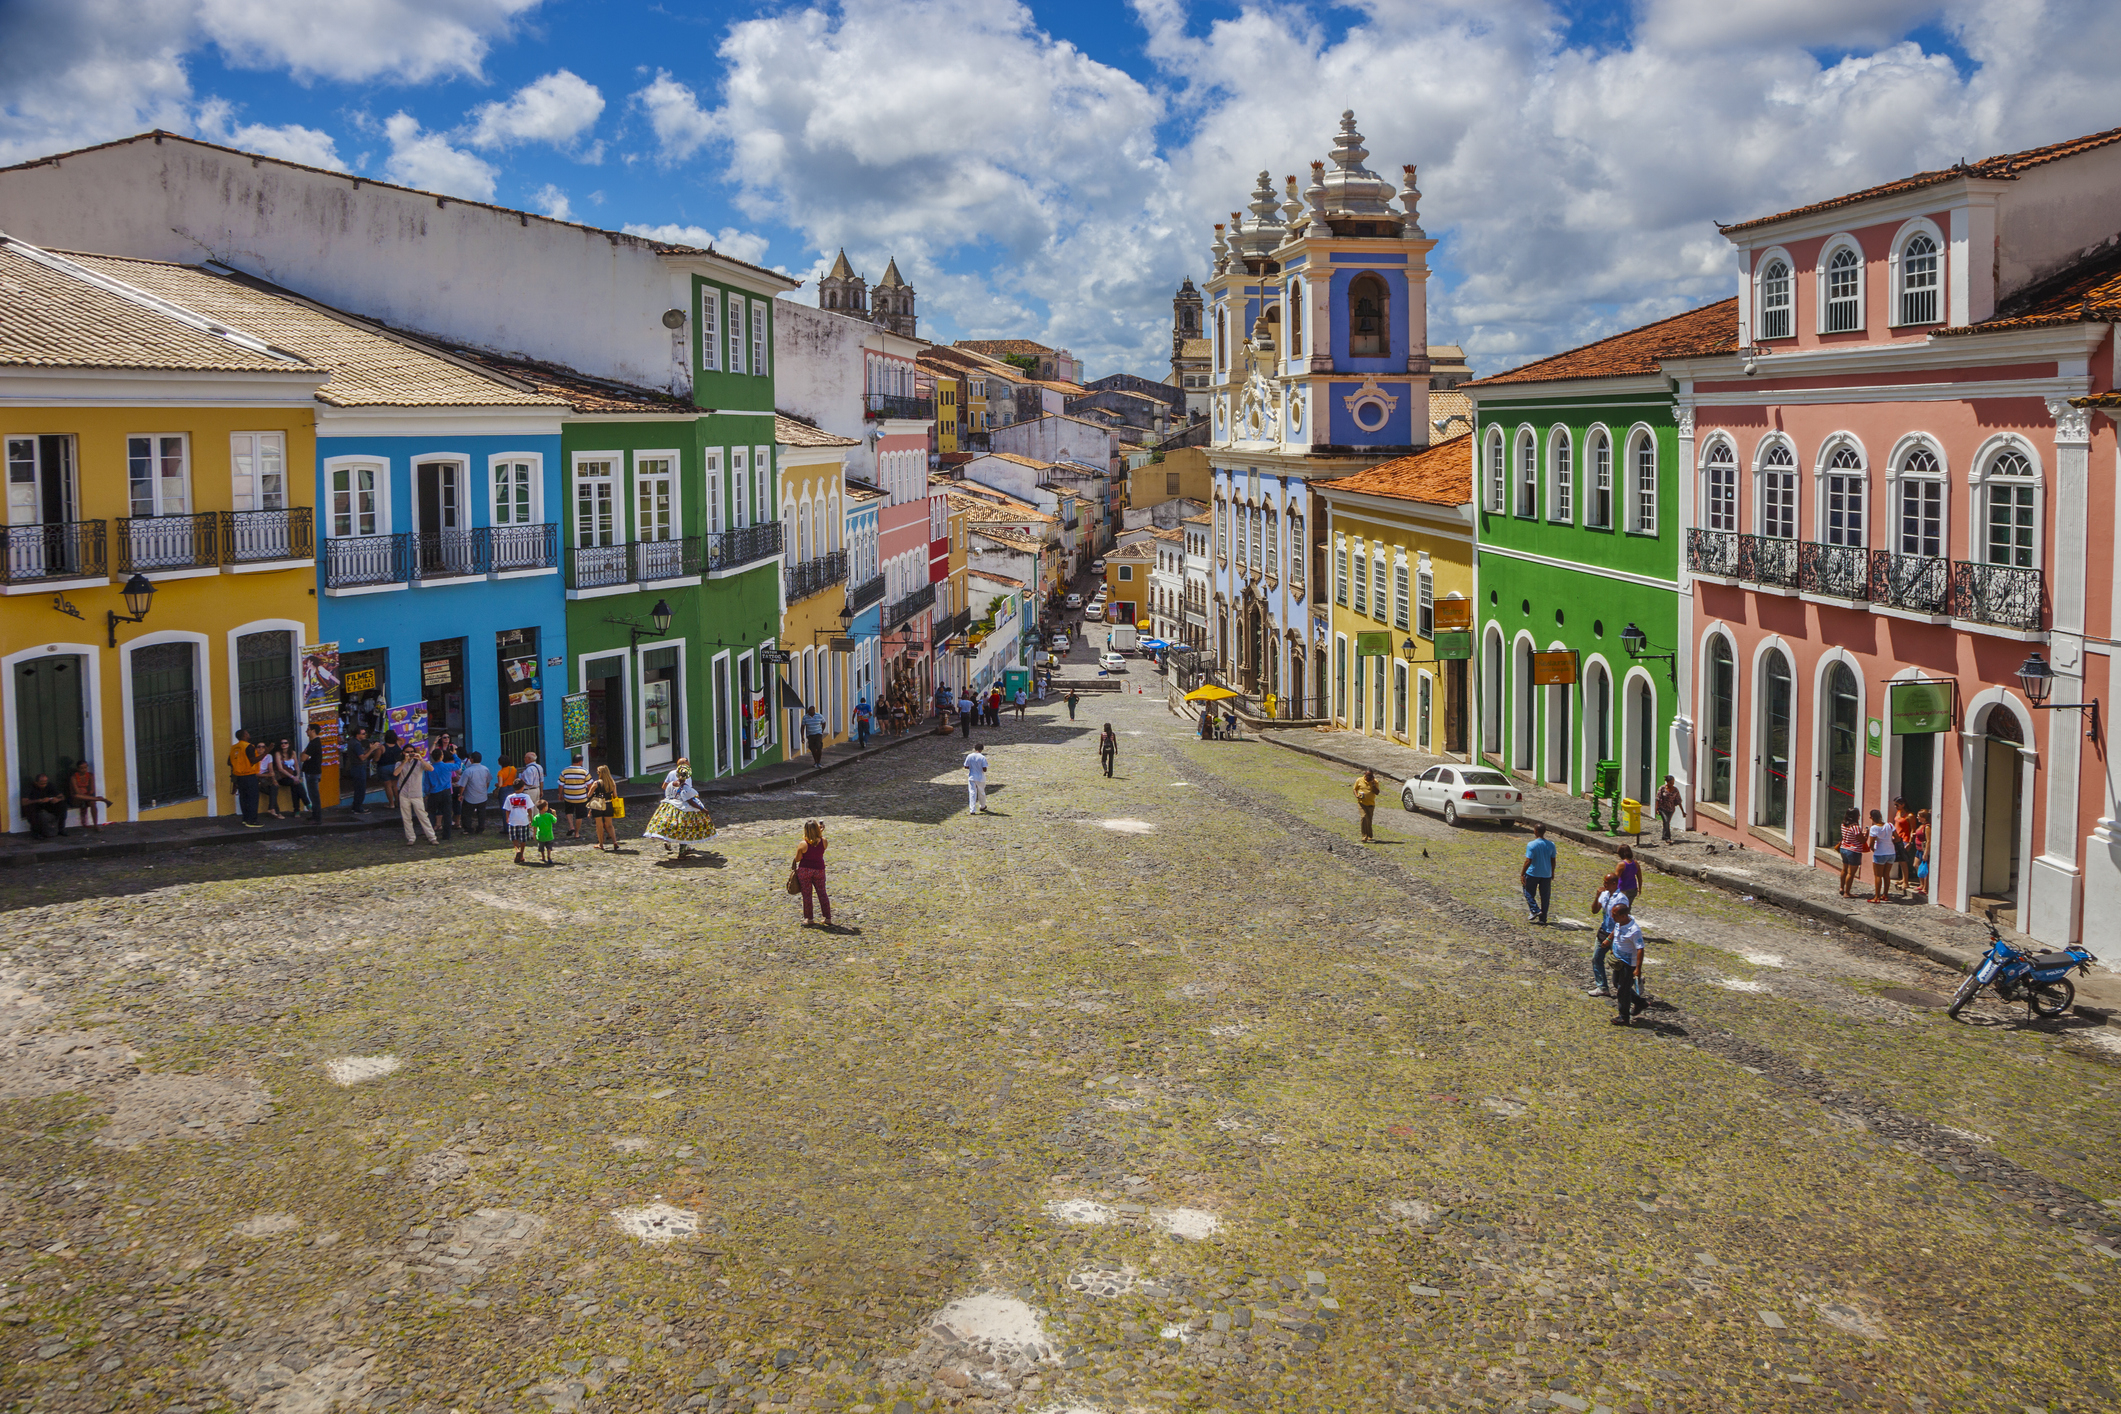 Pedestrians and cyclists on a broad cobblestone street flanked by colorful colonial buildings